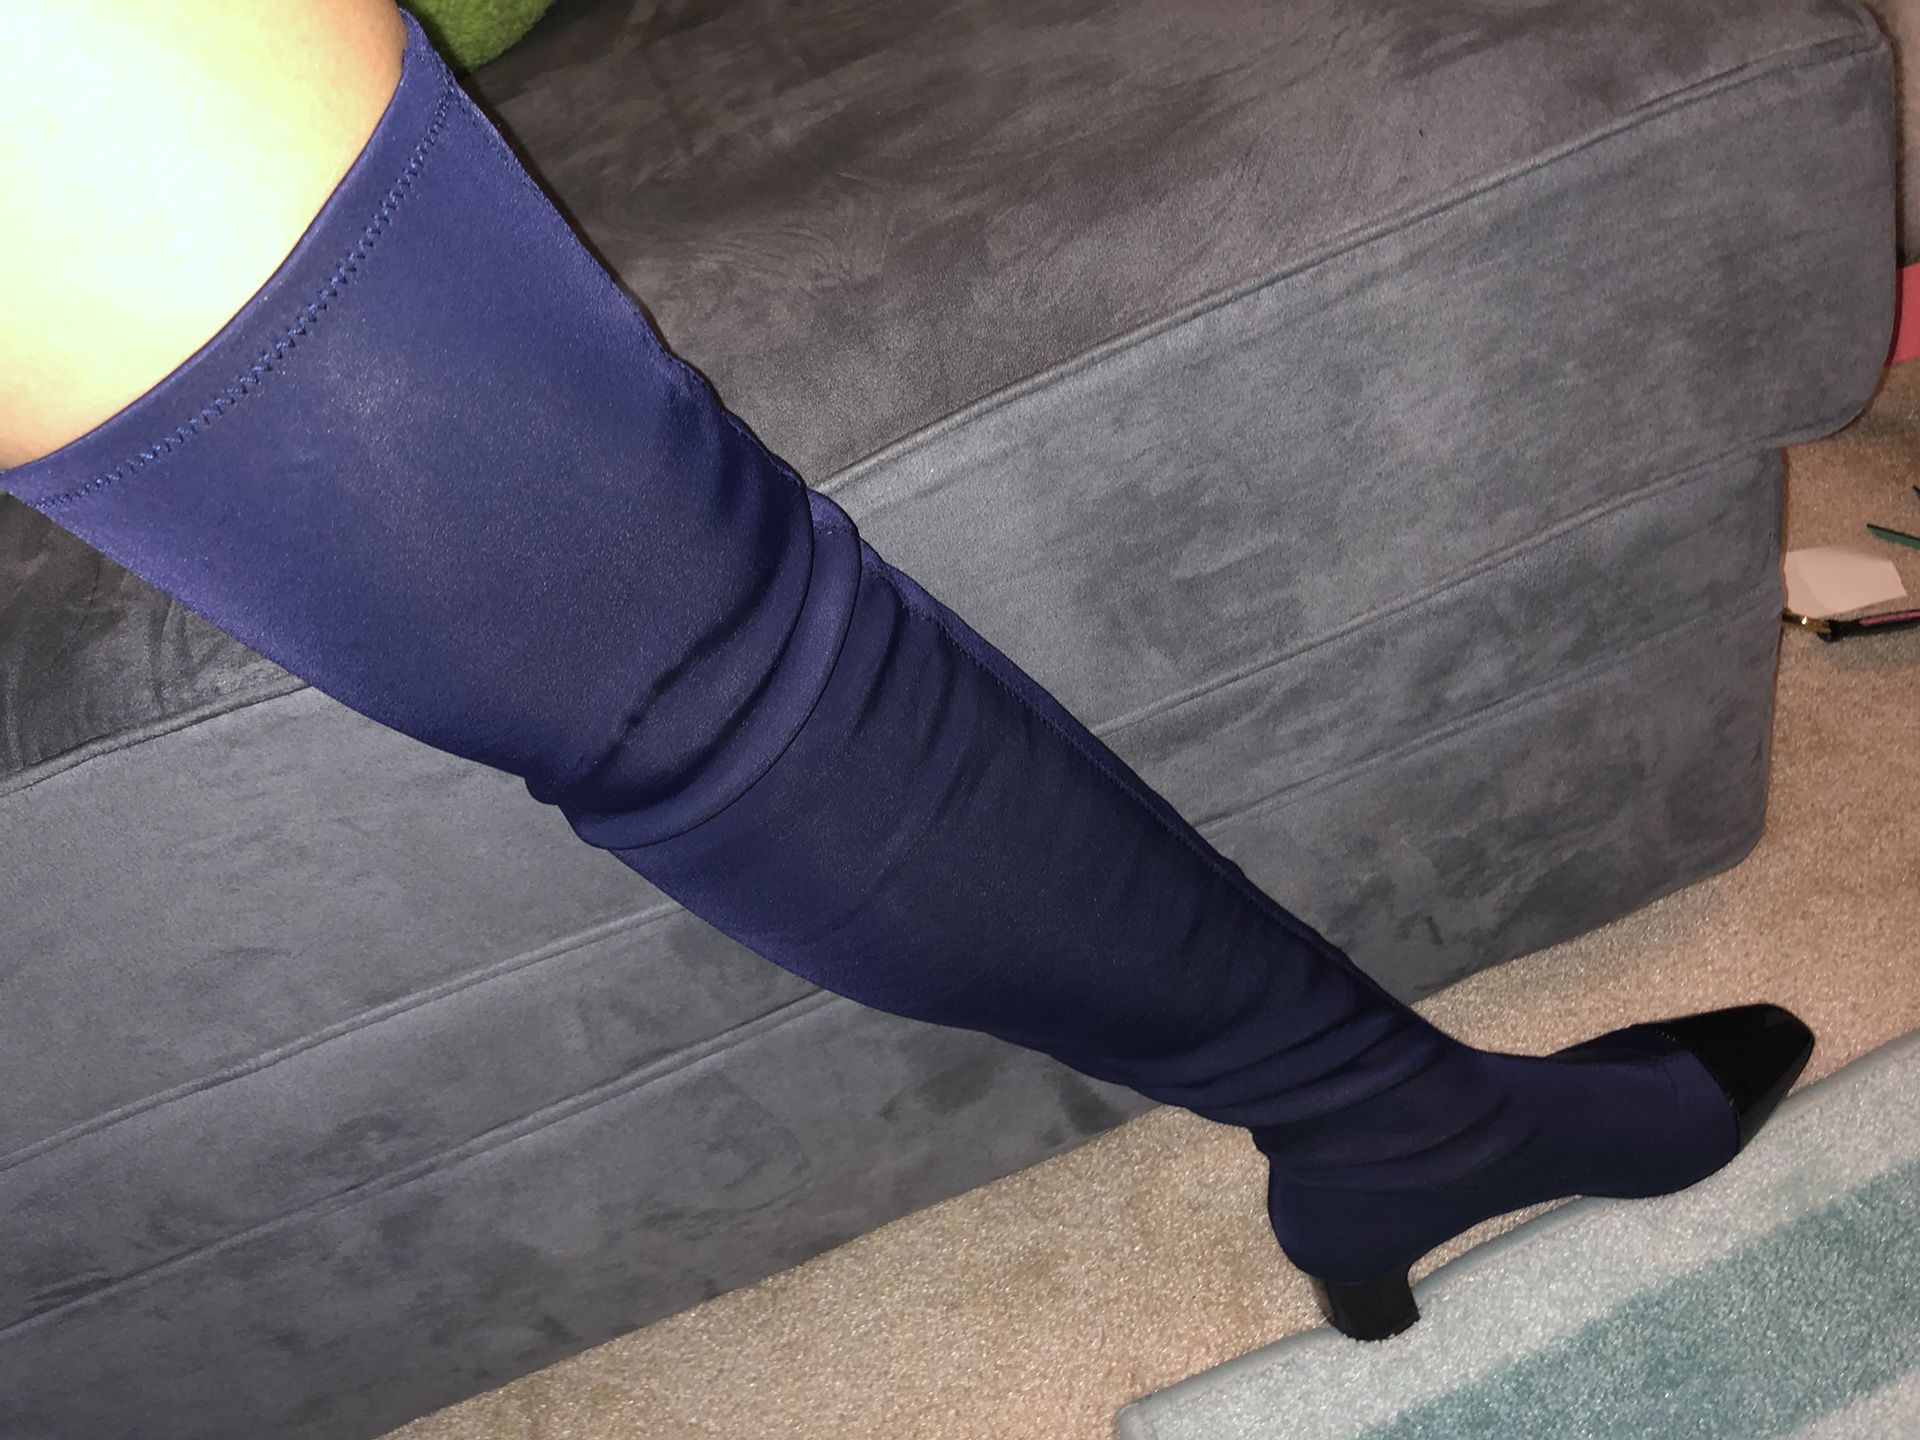 Zara fabric Over Knee Navy blue boots size 6